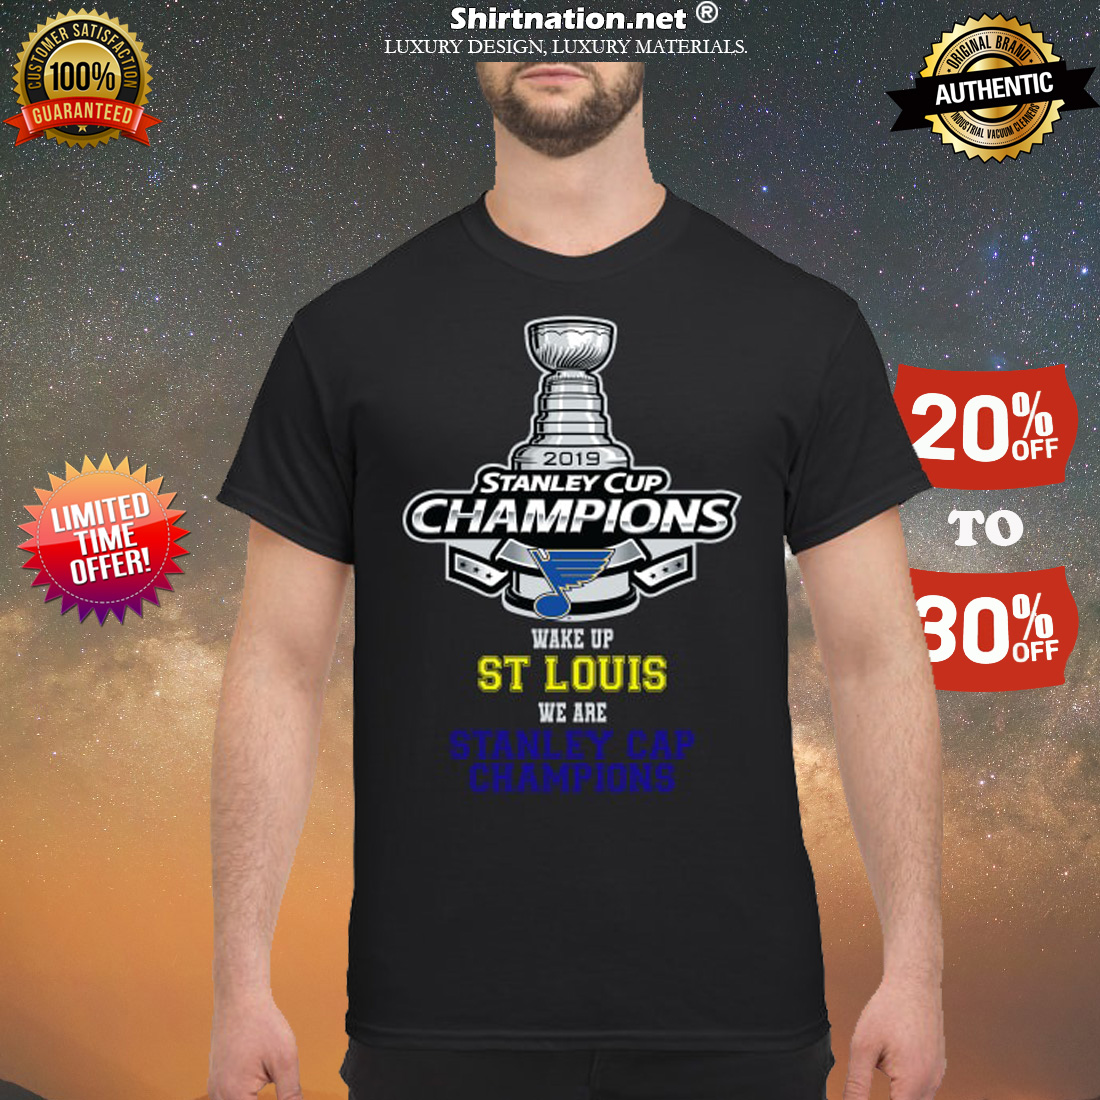 Wake up St Louis we are stanley cap champions classic shirt